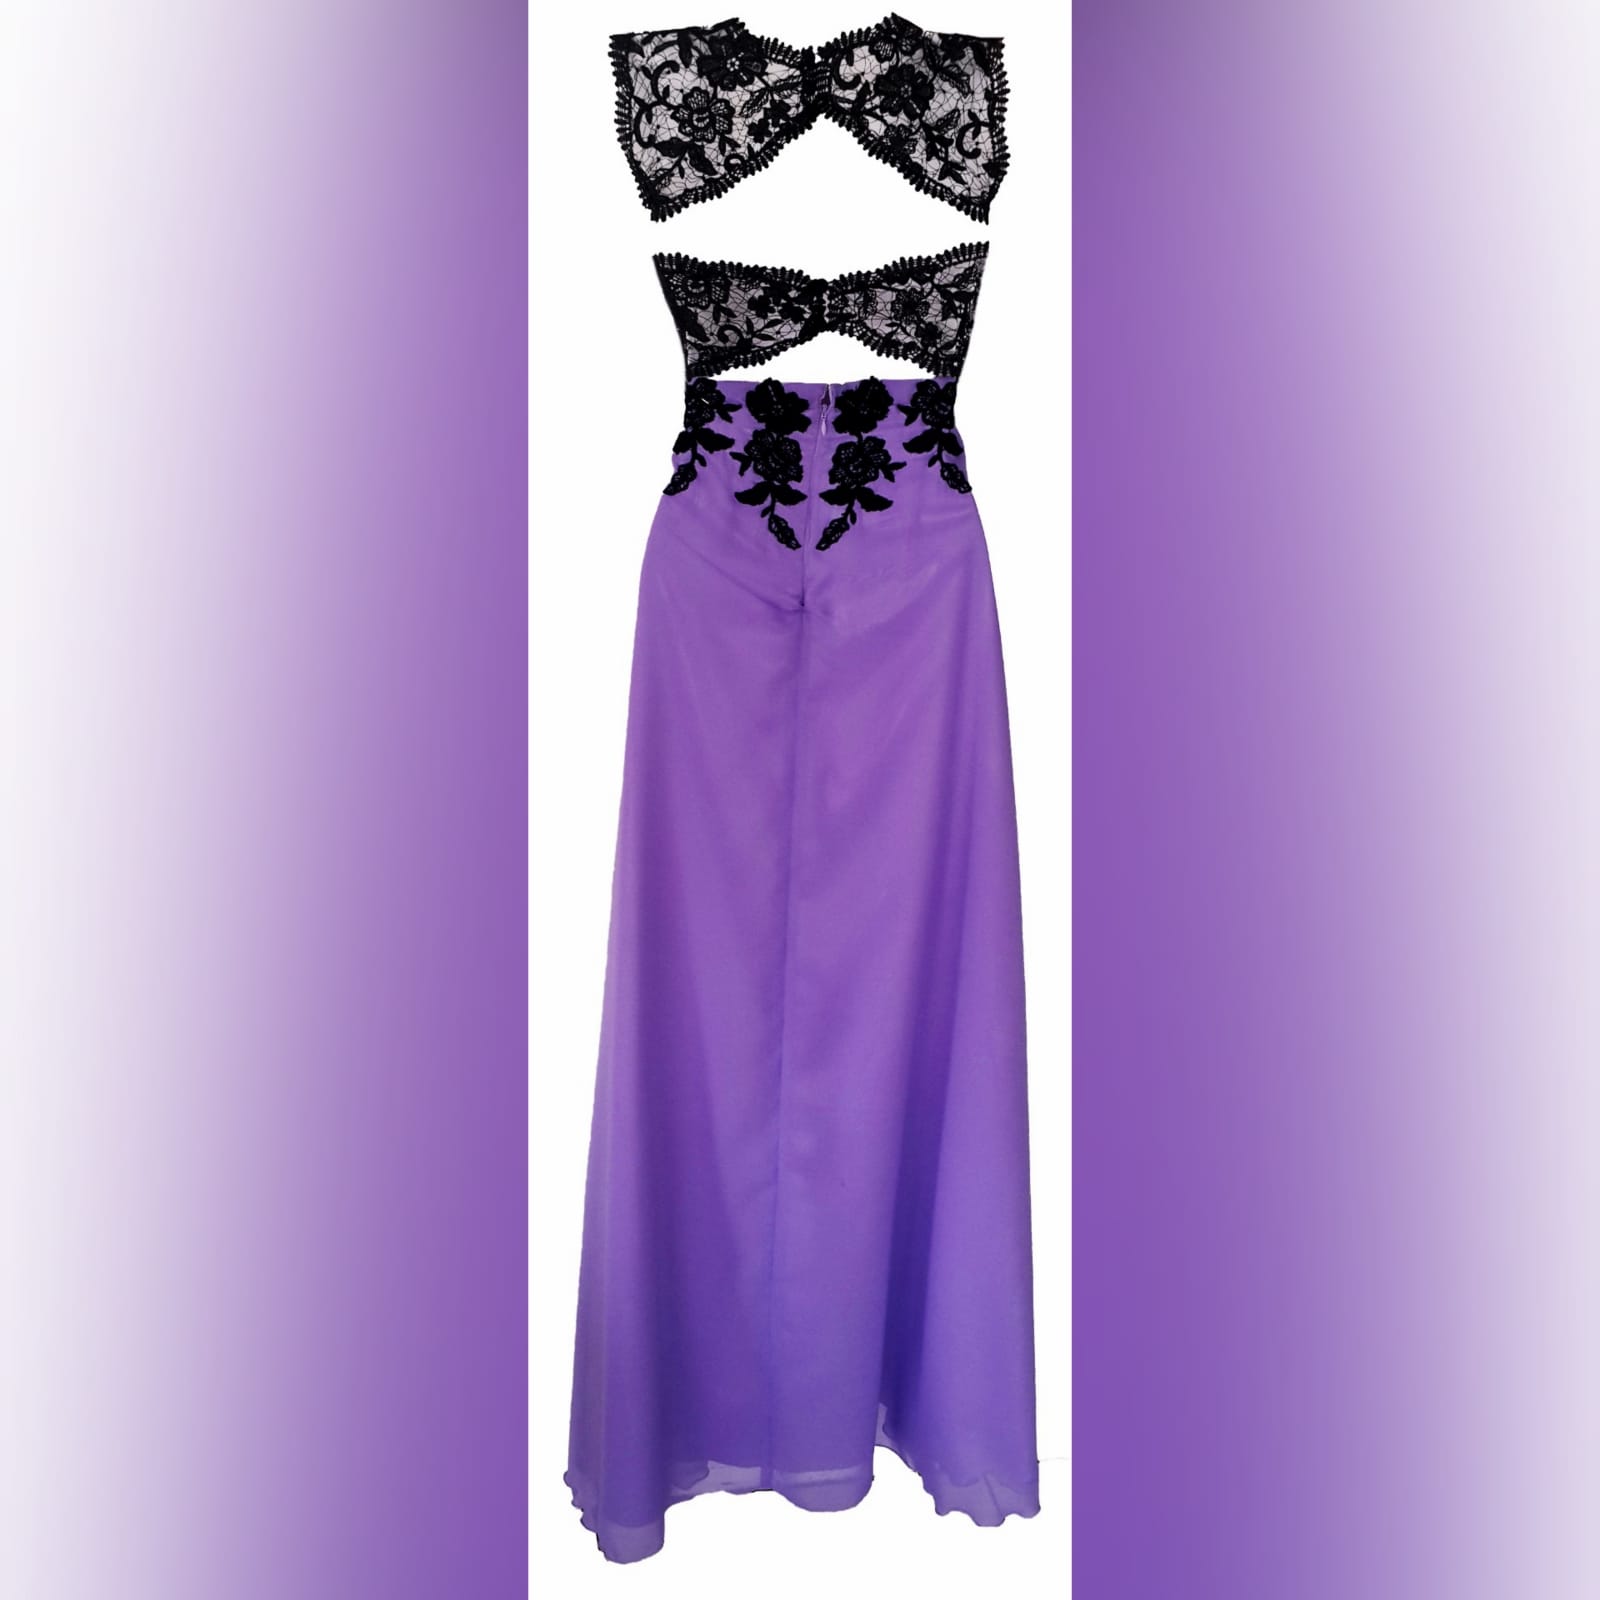 Lilac and black lace prom dress 5 lilac and black lace prom dress. Bodice with applique lace and a sweetheart neckline. With sheer lace shoulder straps and sheer lace on the back. Long and flowy prom dress.